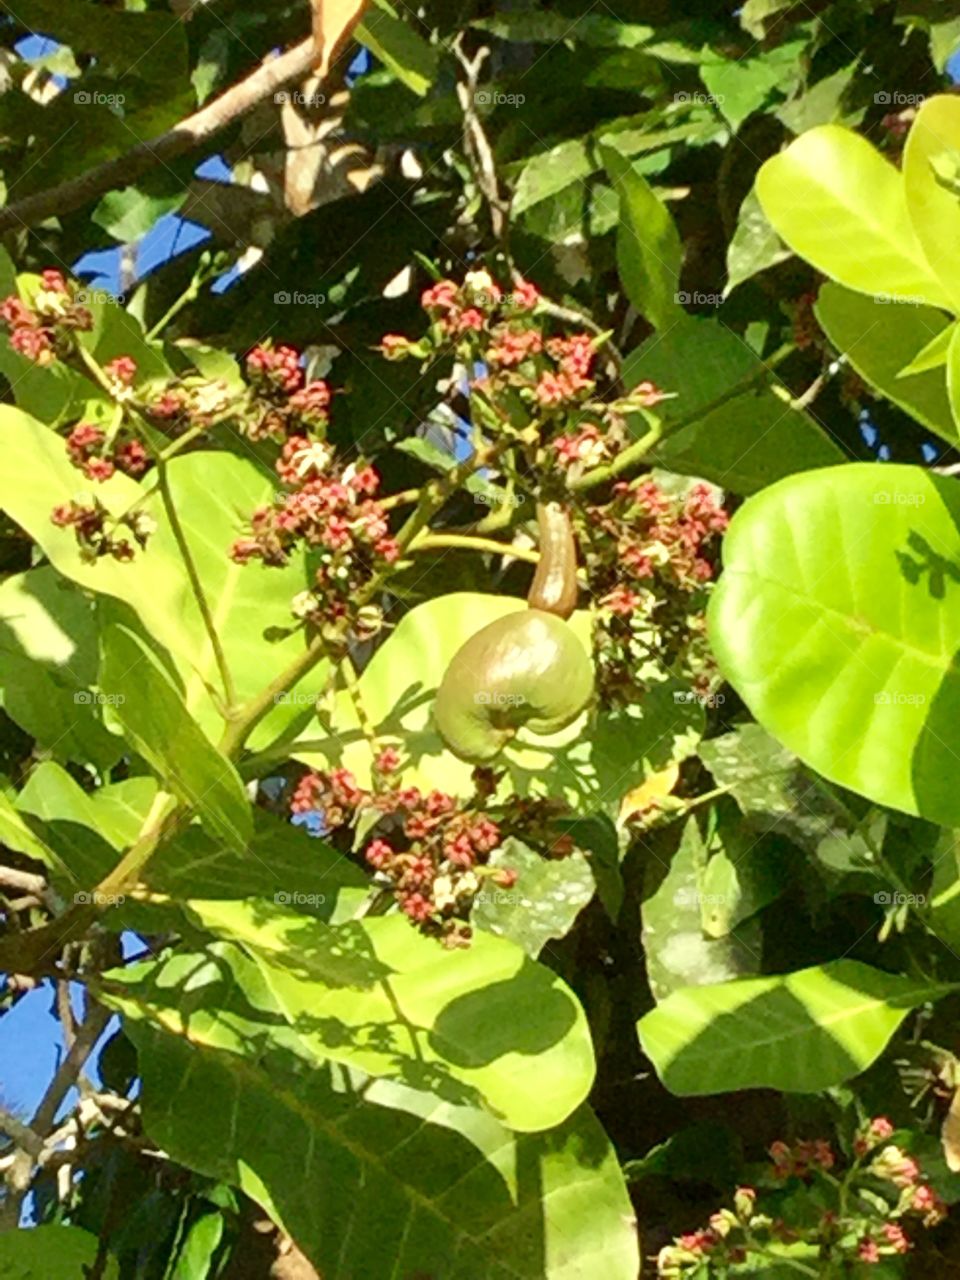 Cashew fruits and nuts on tree